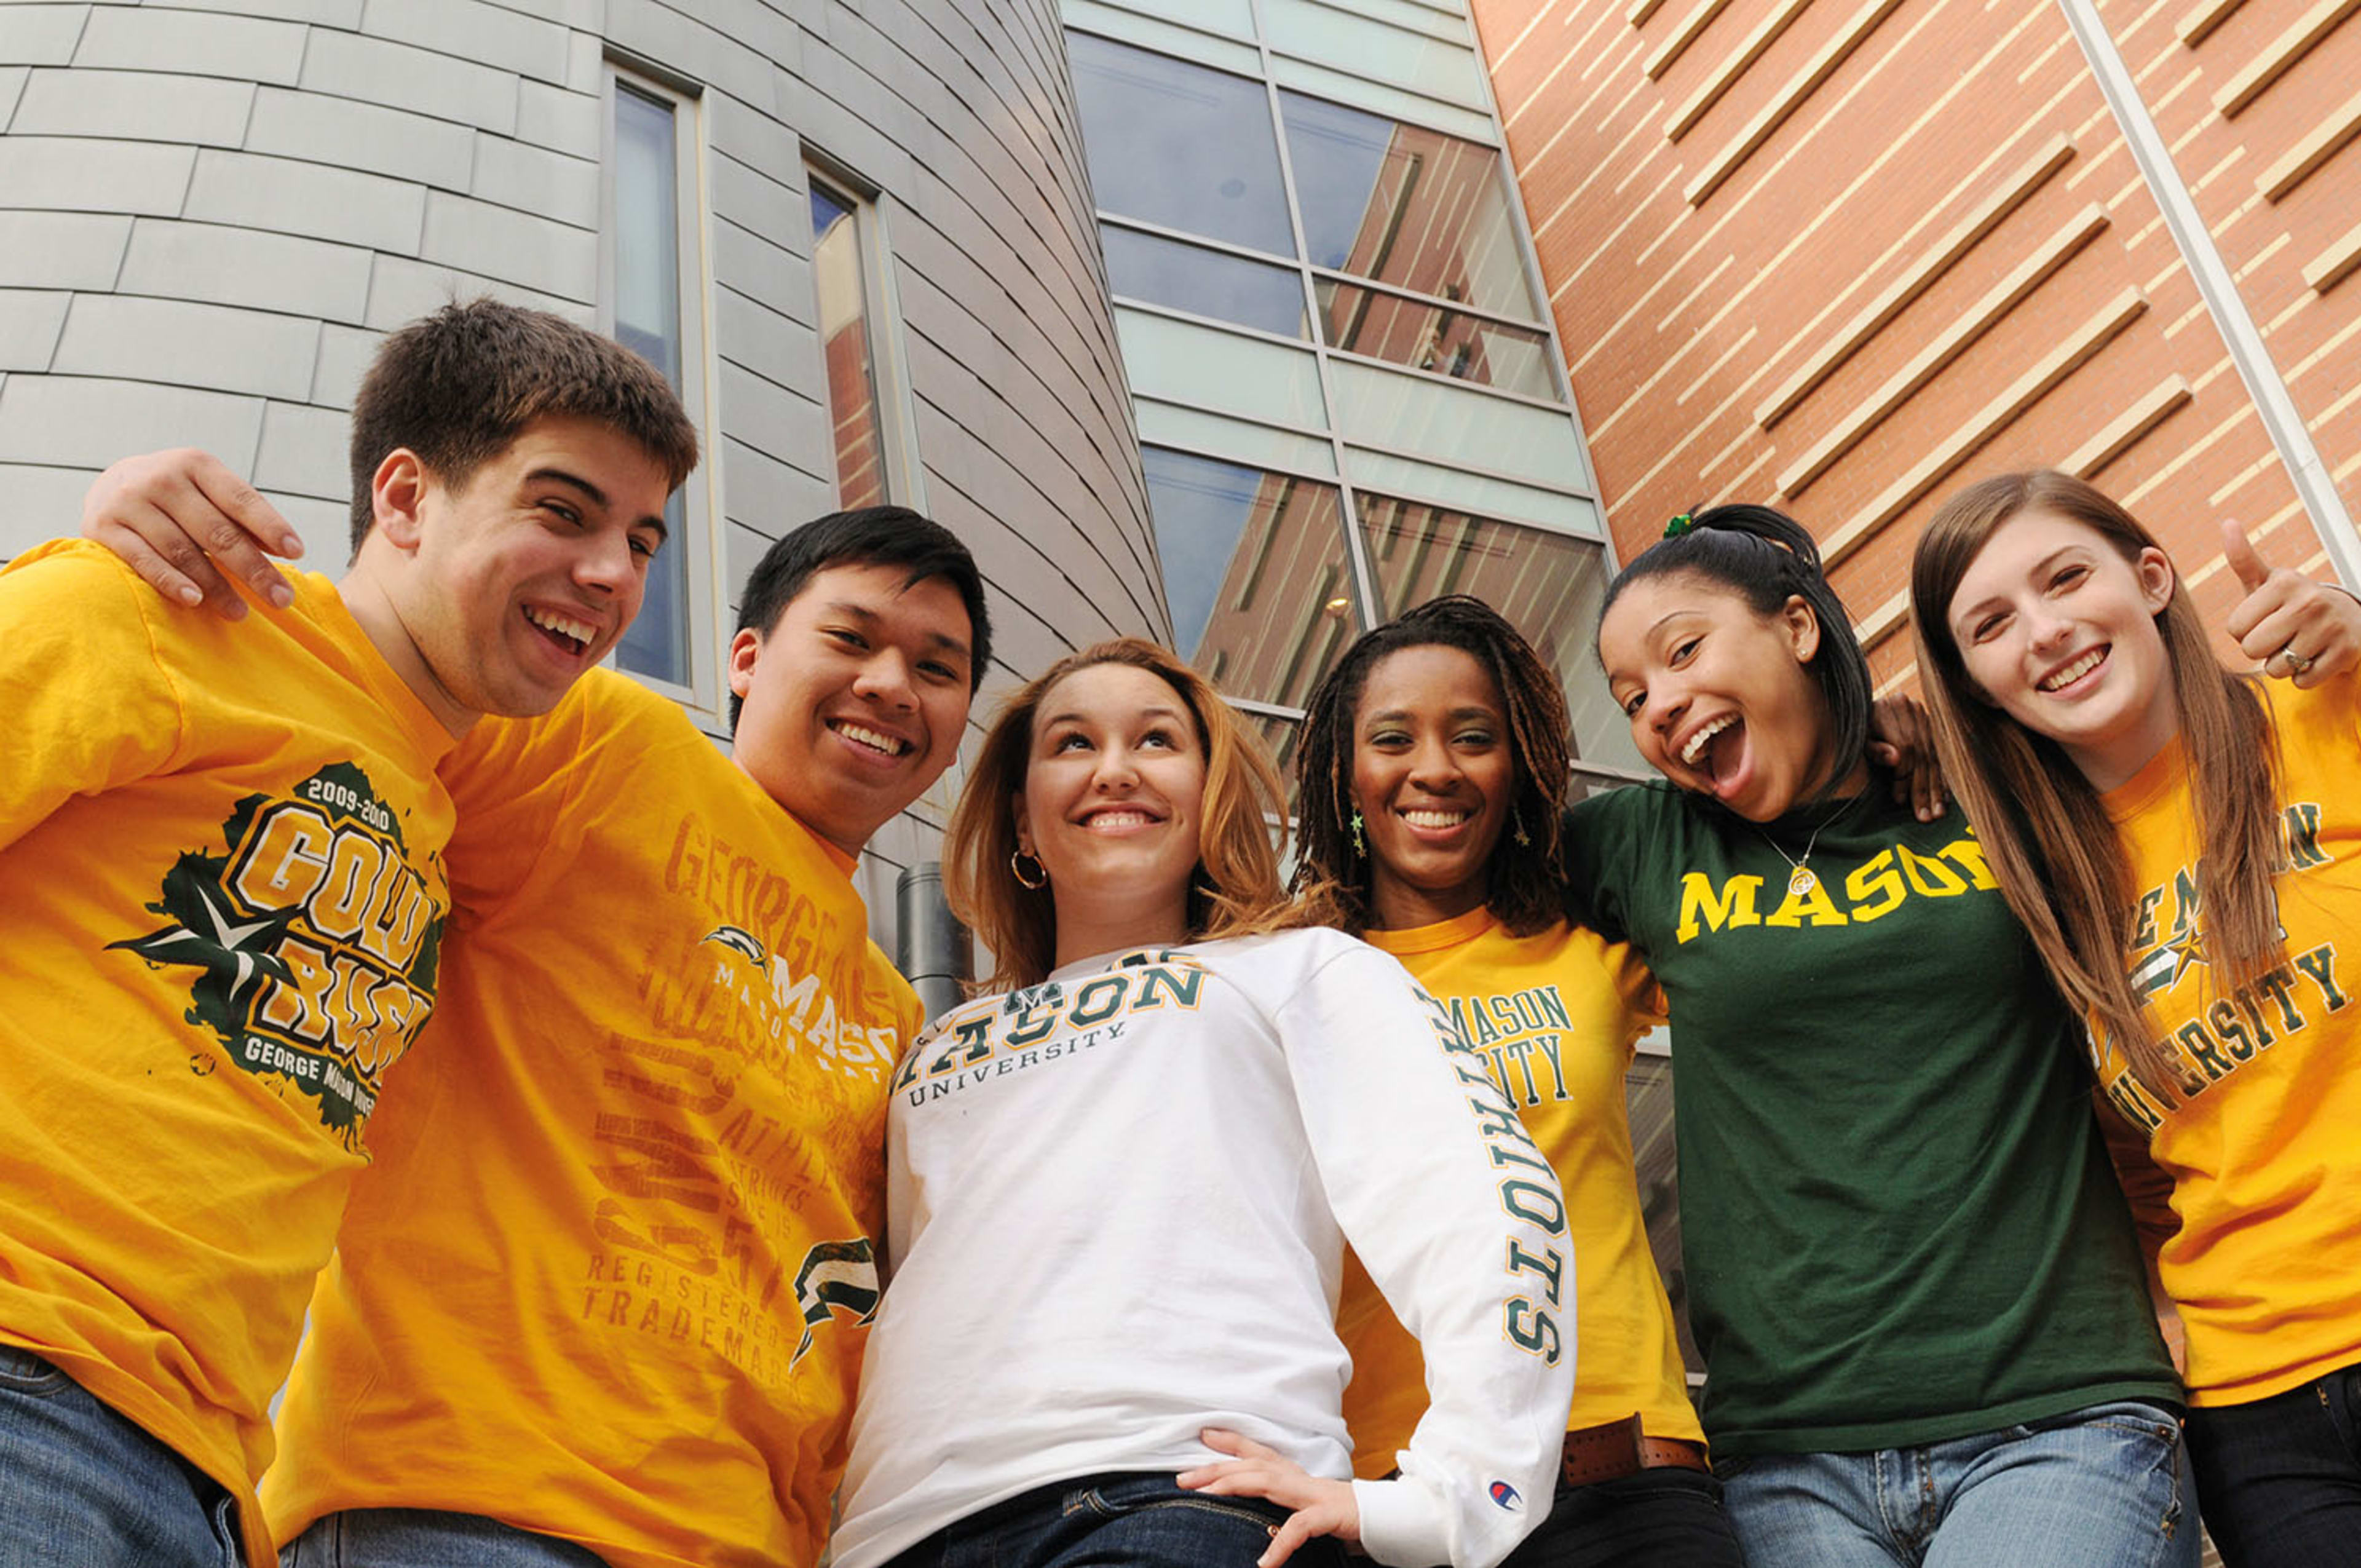 Smiling George Mason students posing for the camera